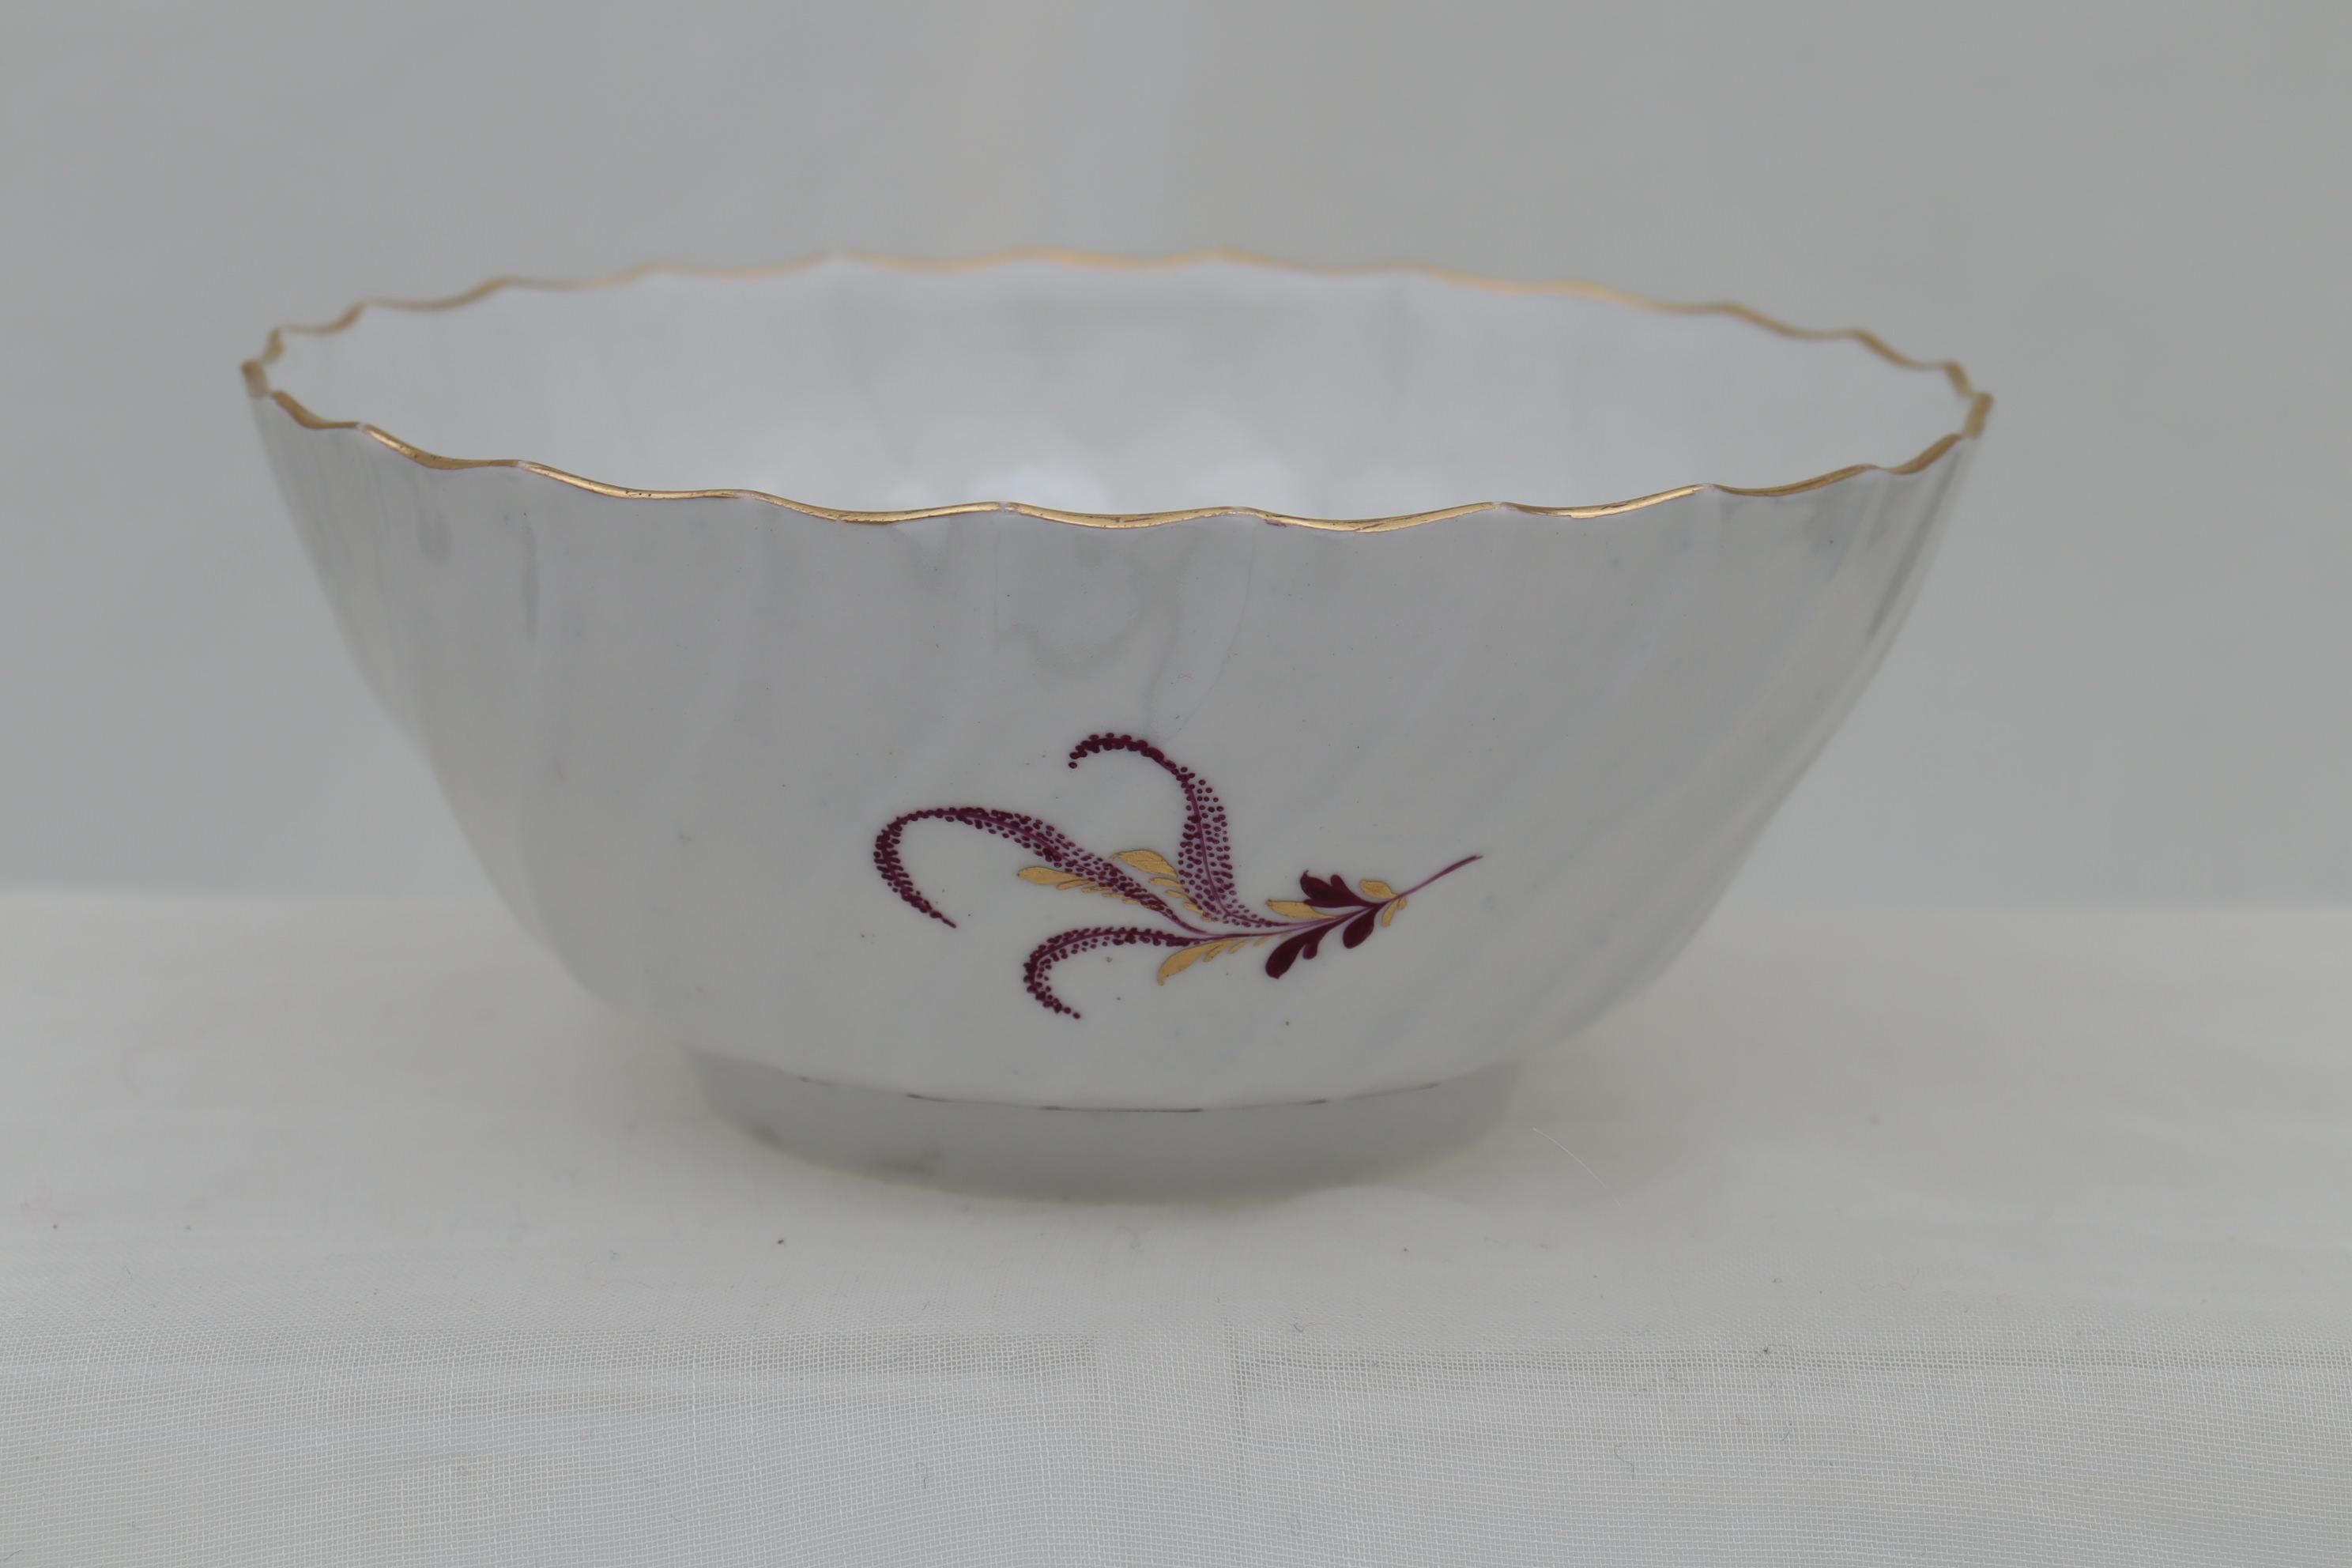 This fluted porcelain slop bowl by Flight and Barr, Worcester is decorated with hand painted flower sprigs done in puce and gold. There are three such sprigs on the outside and one on the bottom of the inside, together with an undulating puce ring